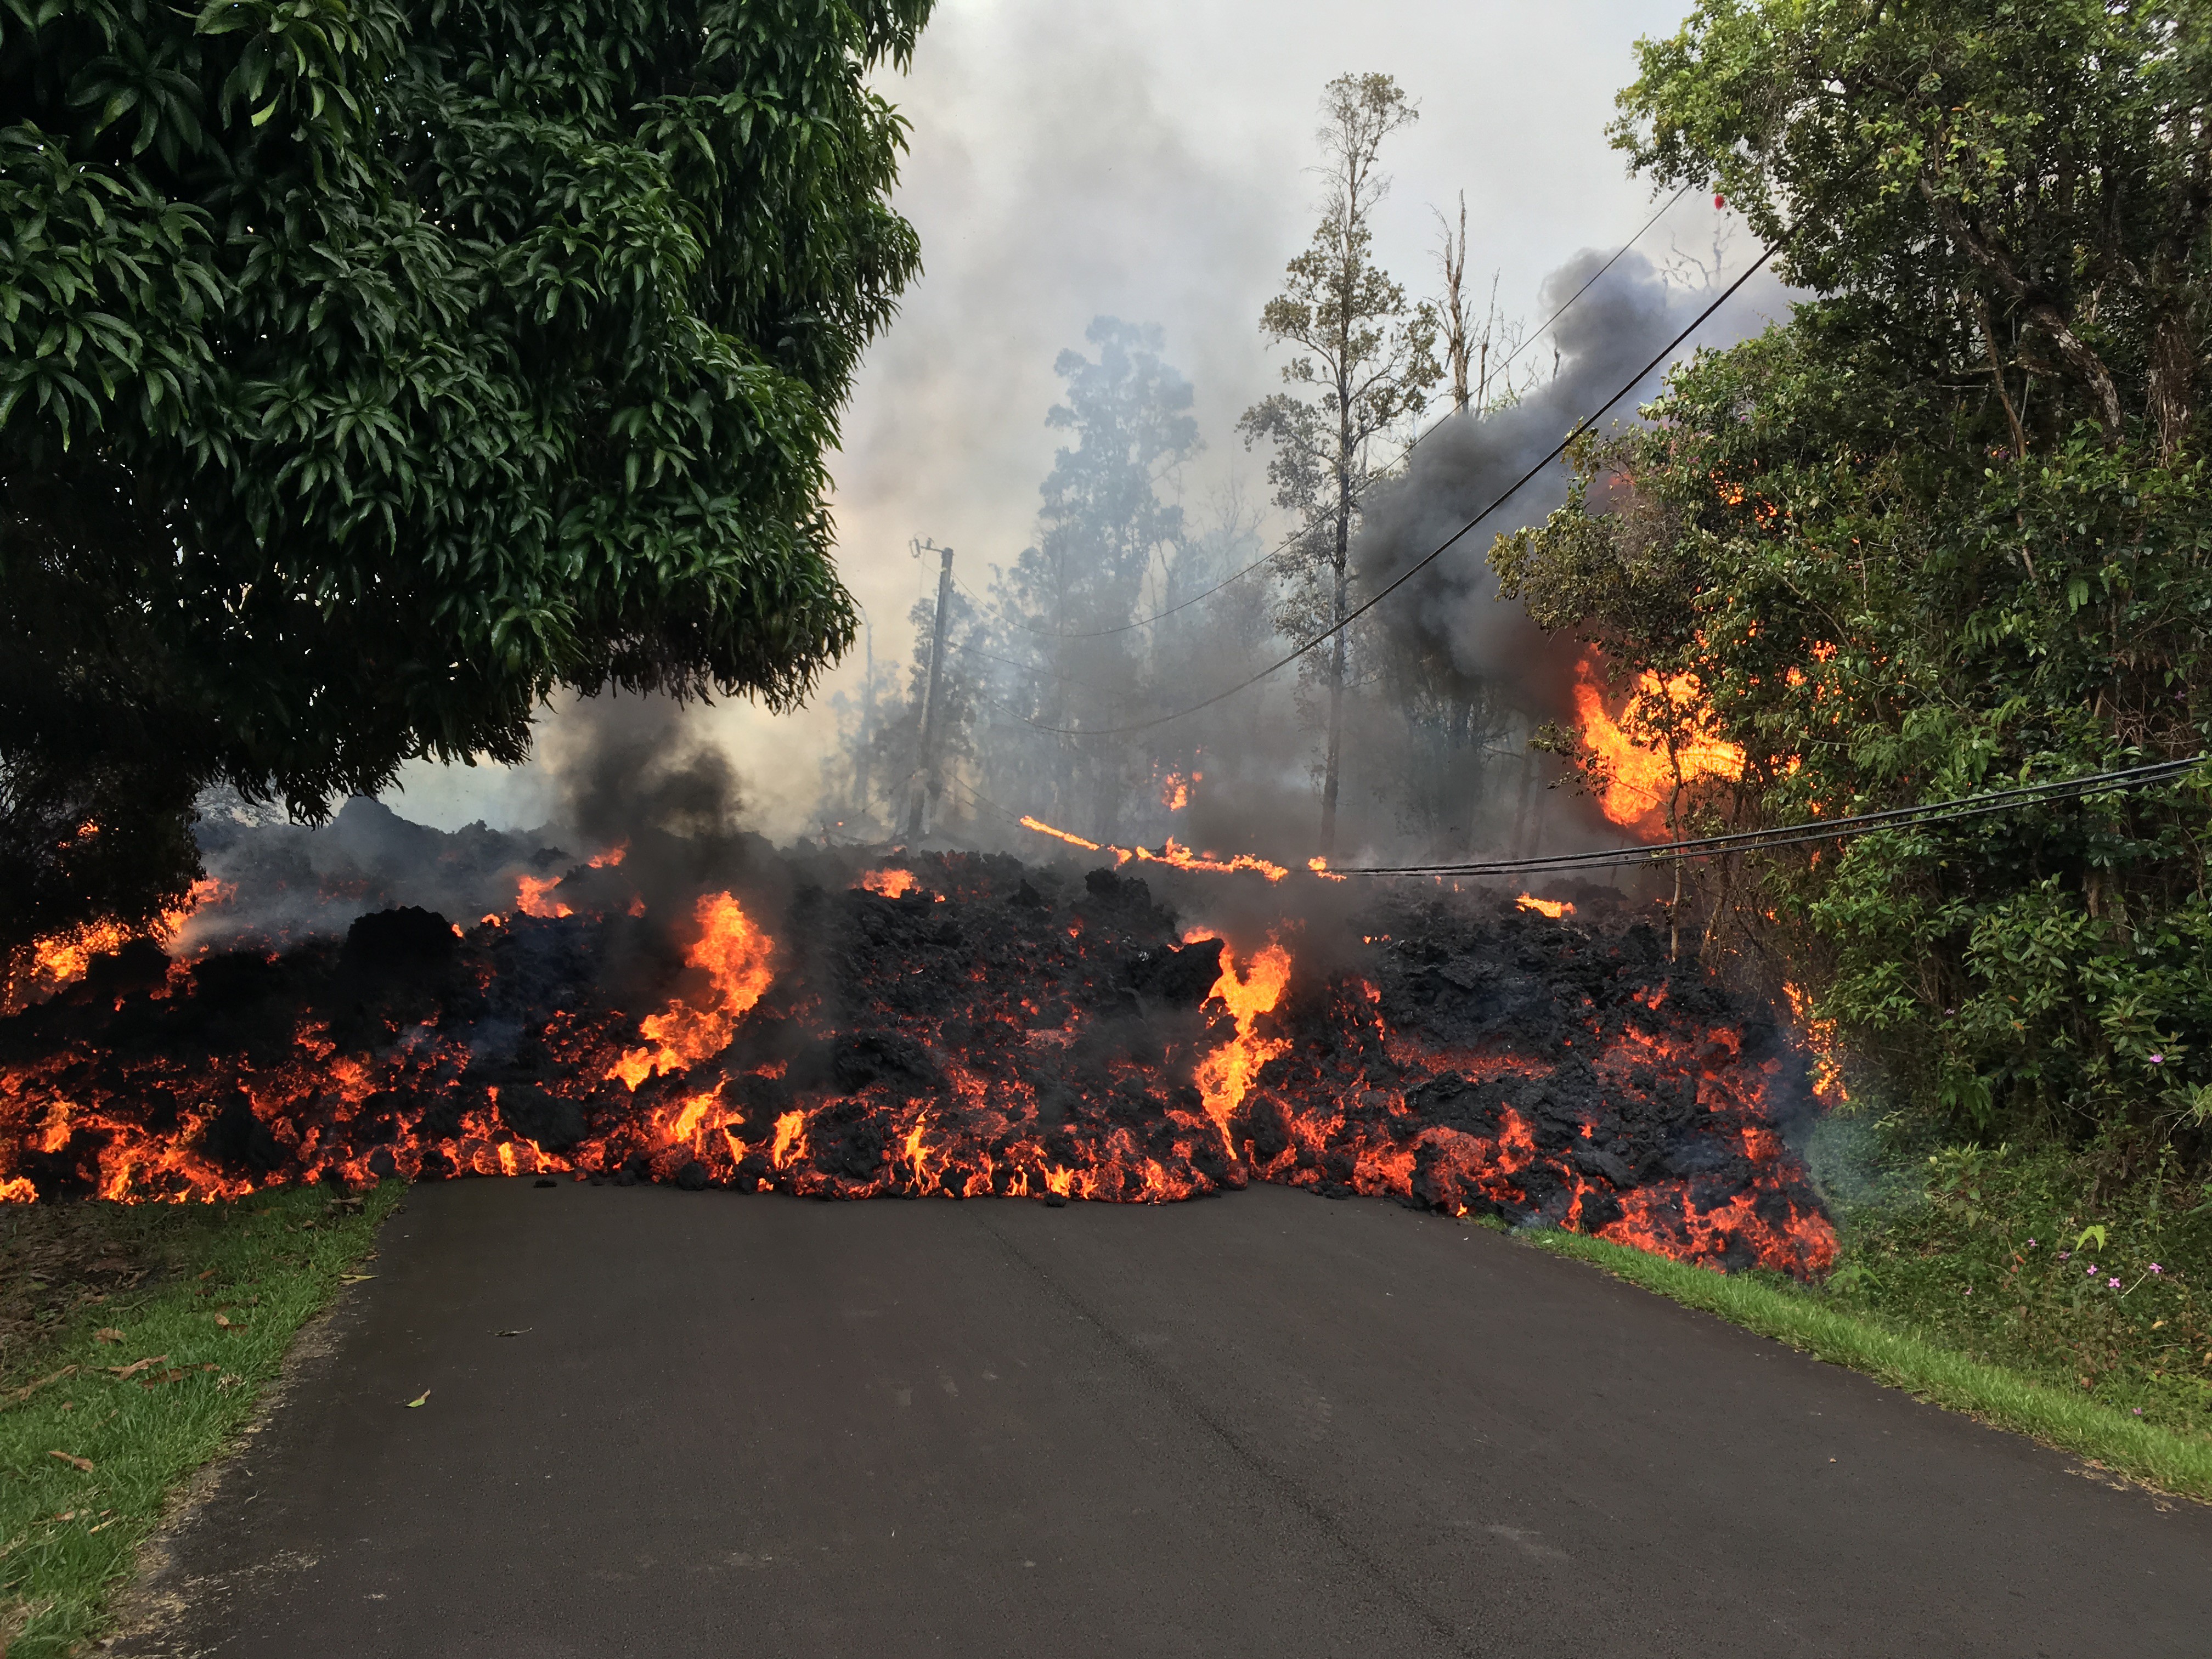 Lava flows from the crater of Kilauea volcano as dozens of structures, including at least nine homes, have been destroyed by scorching lava flows following a massive volcano eruption on Hawaii's Big Island, USA on May 6, 2018. Hawaii's Kilauea volcano erupted Thursday triggering a series of earthquakes that have continued to rattle the island as burning blood-red lava spewed hundreds of feet in the air from cracks in the ground. The strongest earthquakes were felt Friday when a 5.6-magnitude temblor was followed an hour later by a 6.9-magnitude earthquake, according to the U.S. Geological Survey (USGS). (Anadolu Agency—Getty Images)